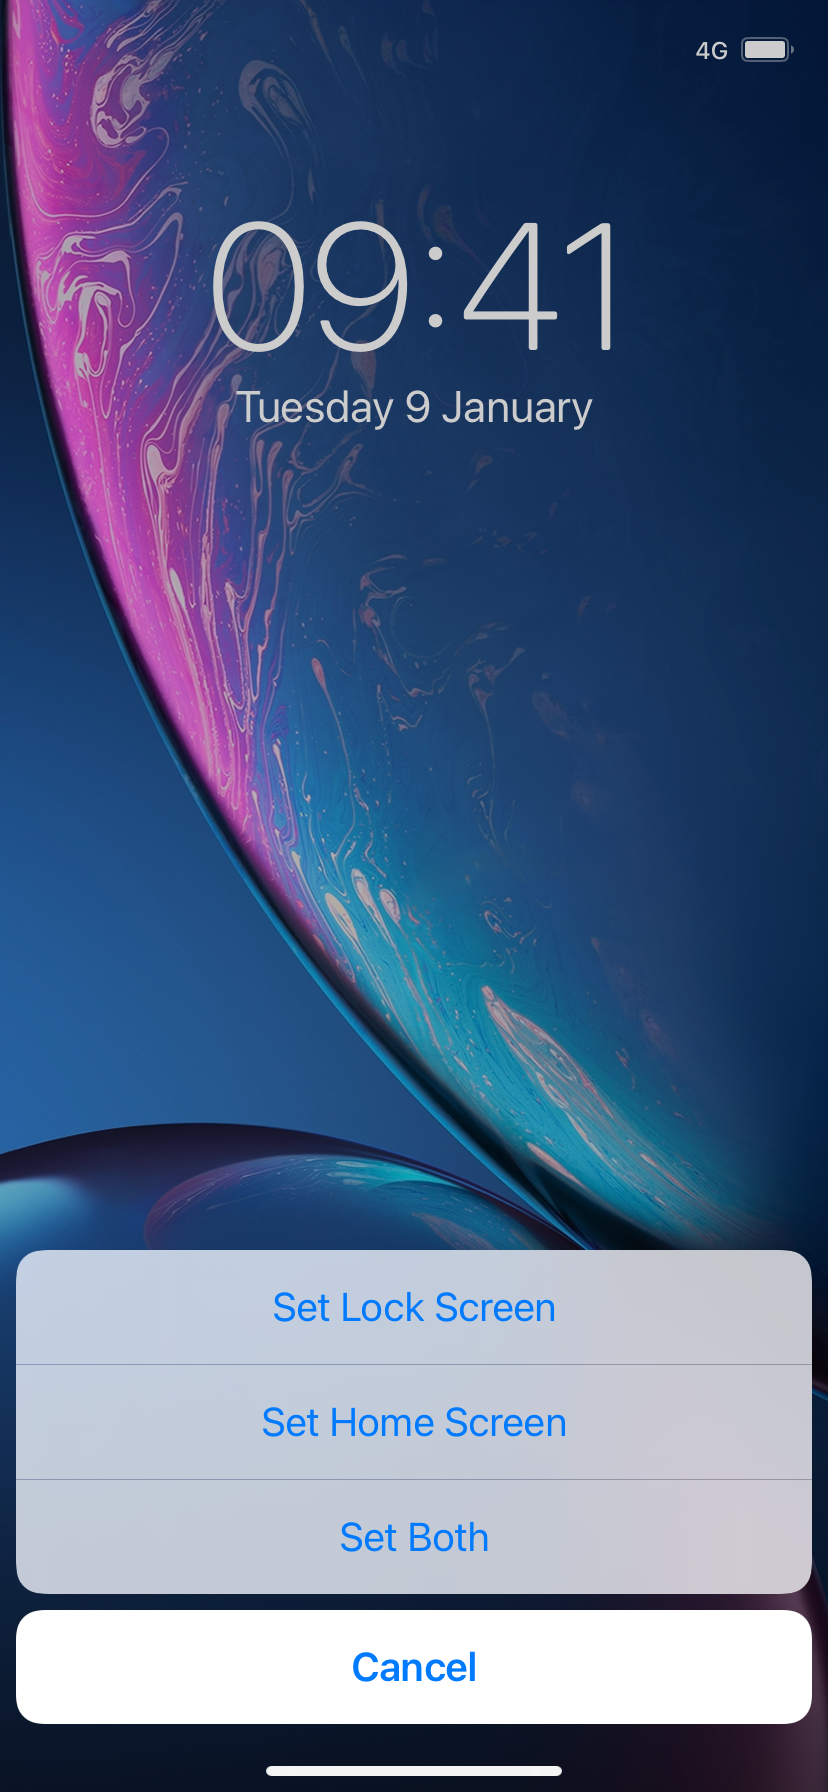 How to change iPhone wallpaper